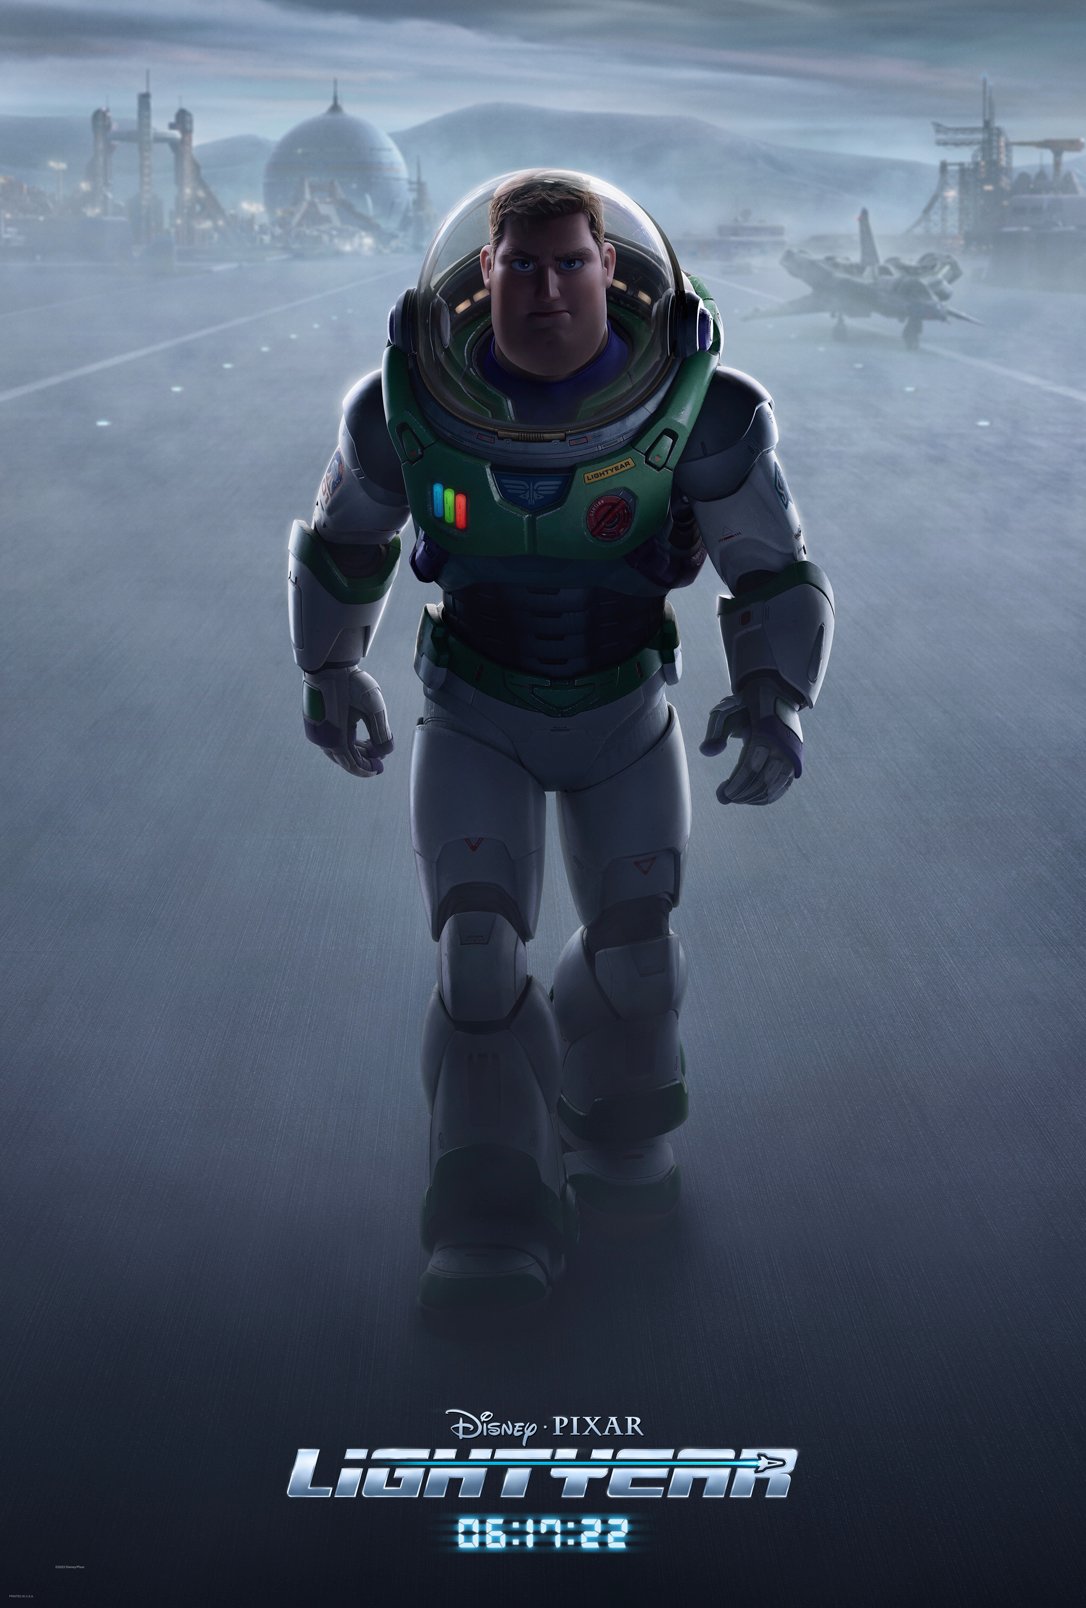 Lightyear official movie poster